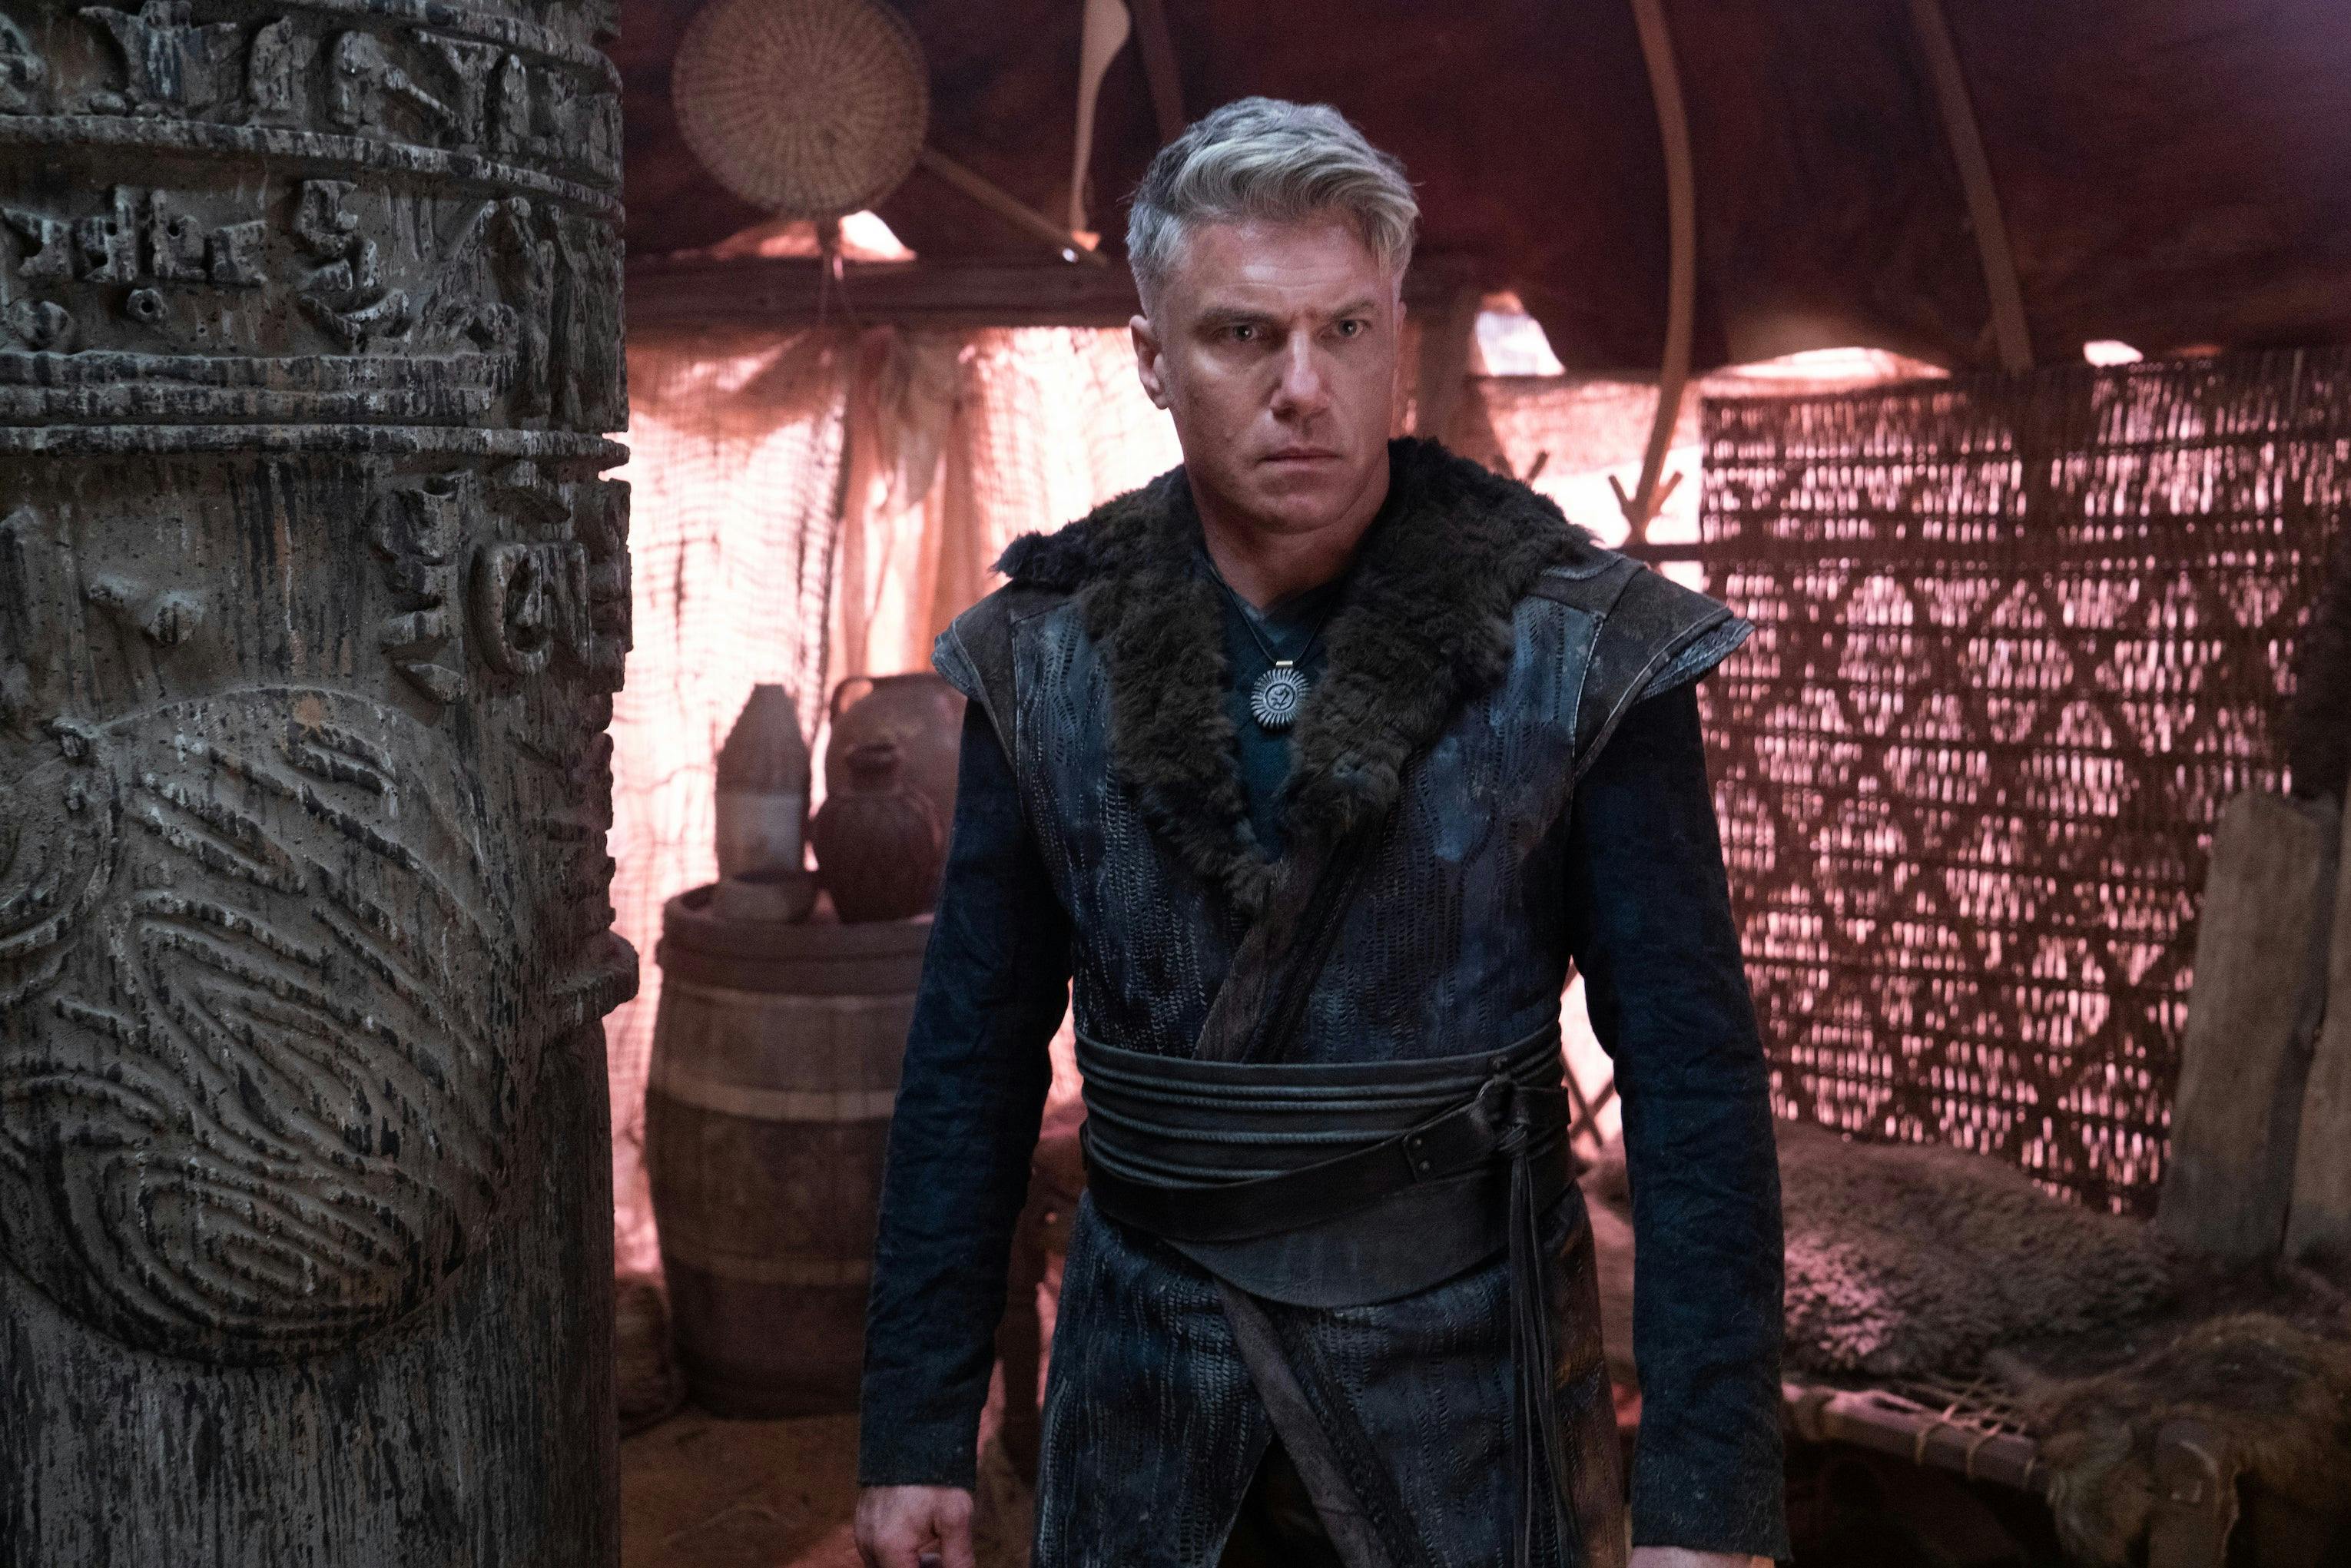 Christopher Pike dressed in a civilian attire against a carved pillar in 'Among the Lotus Eaters'